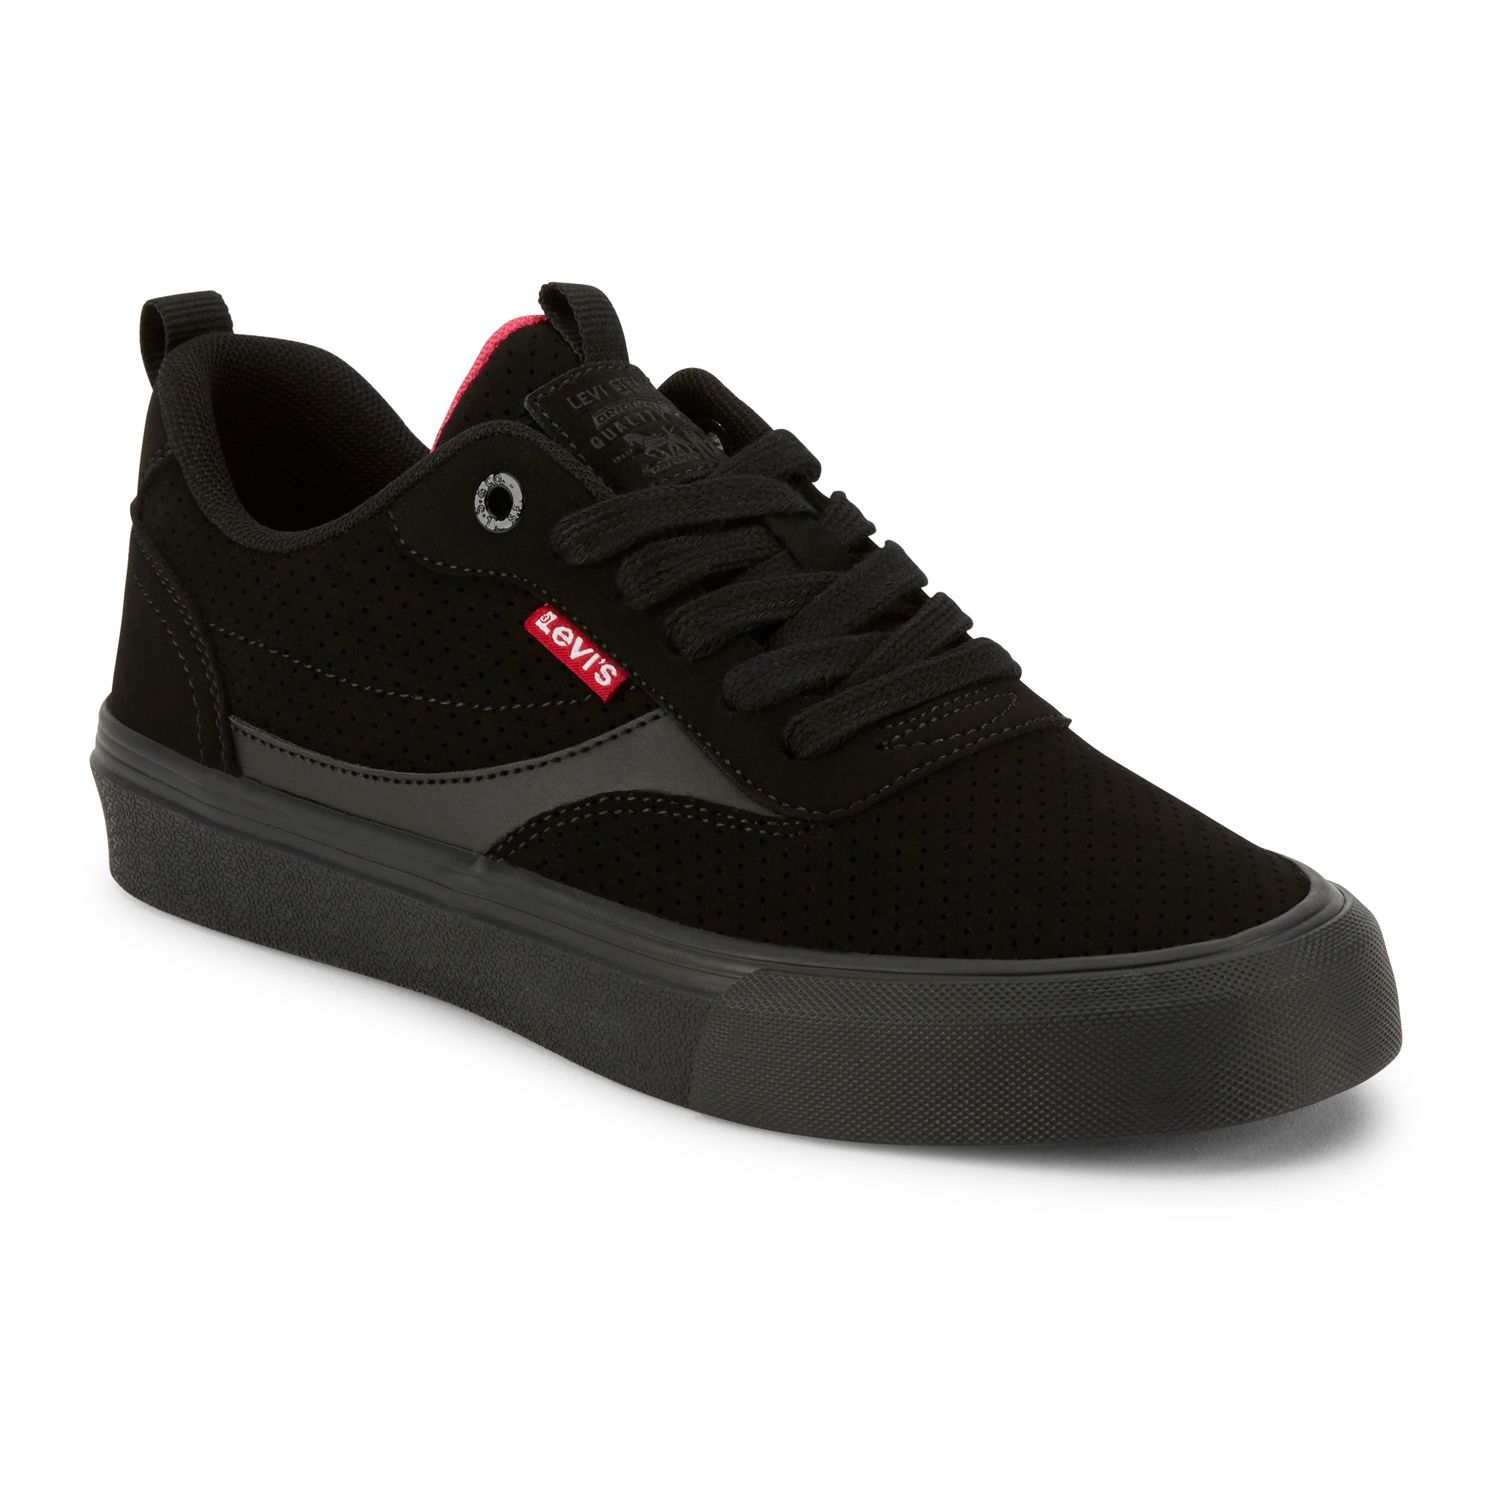 Image for Levi's Naya Pin Perf Sporty Fashion Women's Skate Shoes at Kohl's.